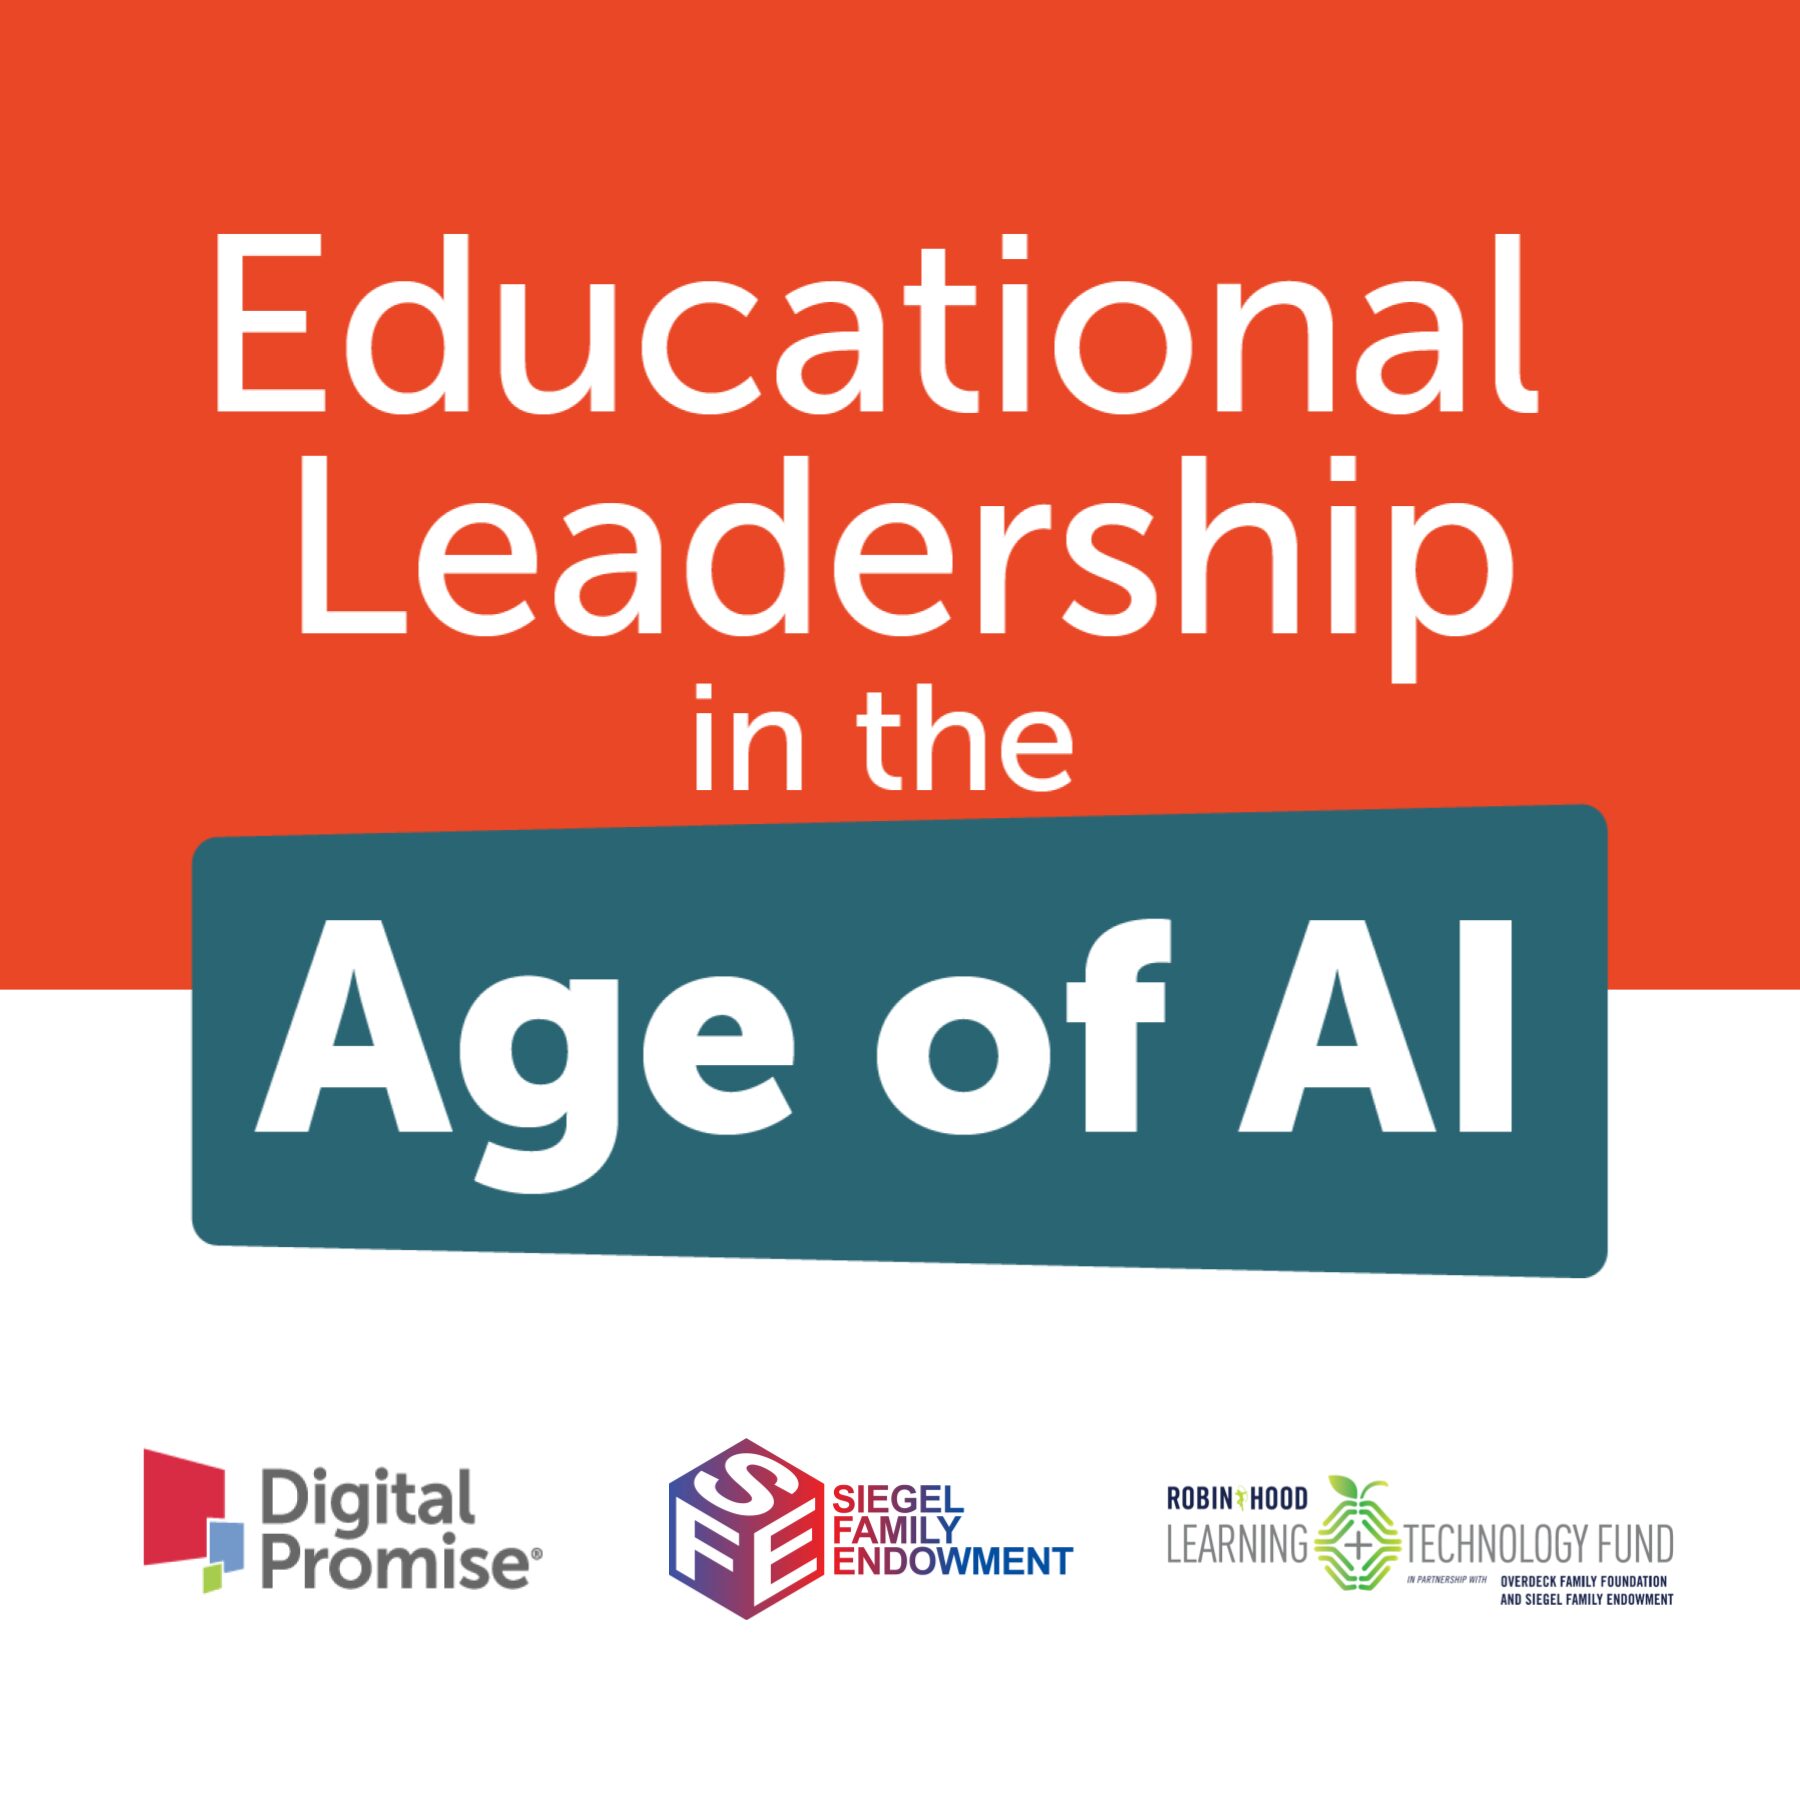 Educational Leadership in the Age of AI